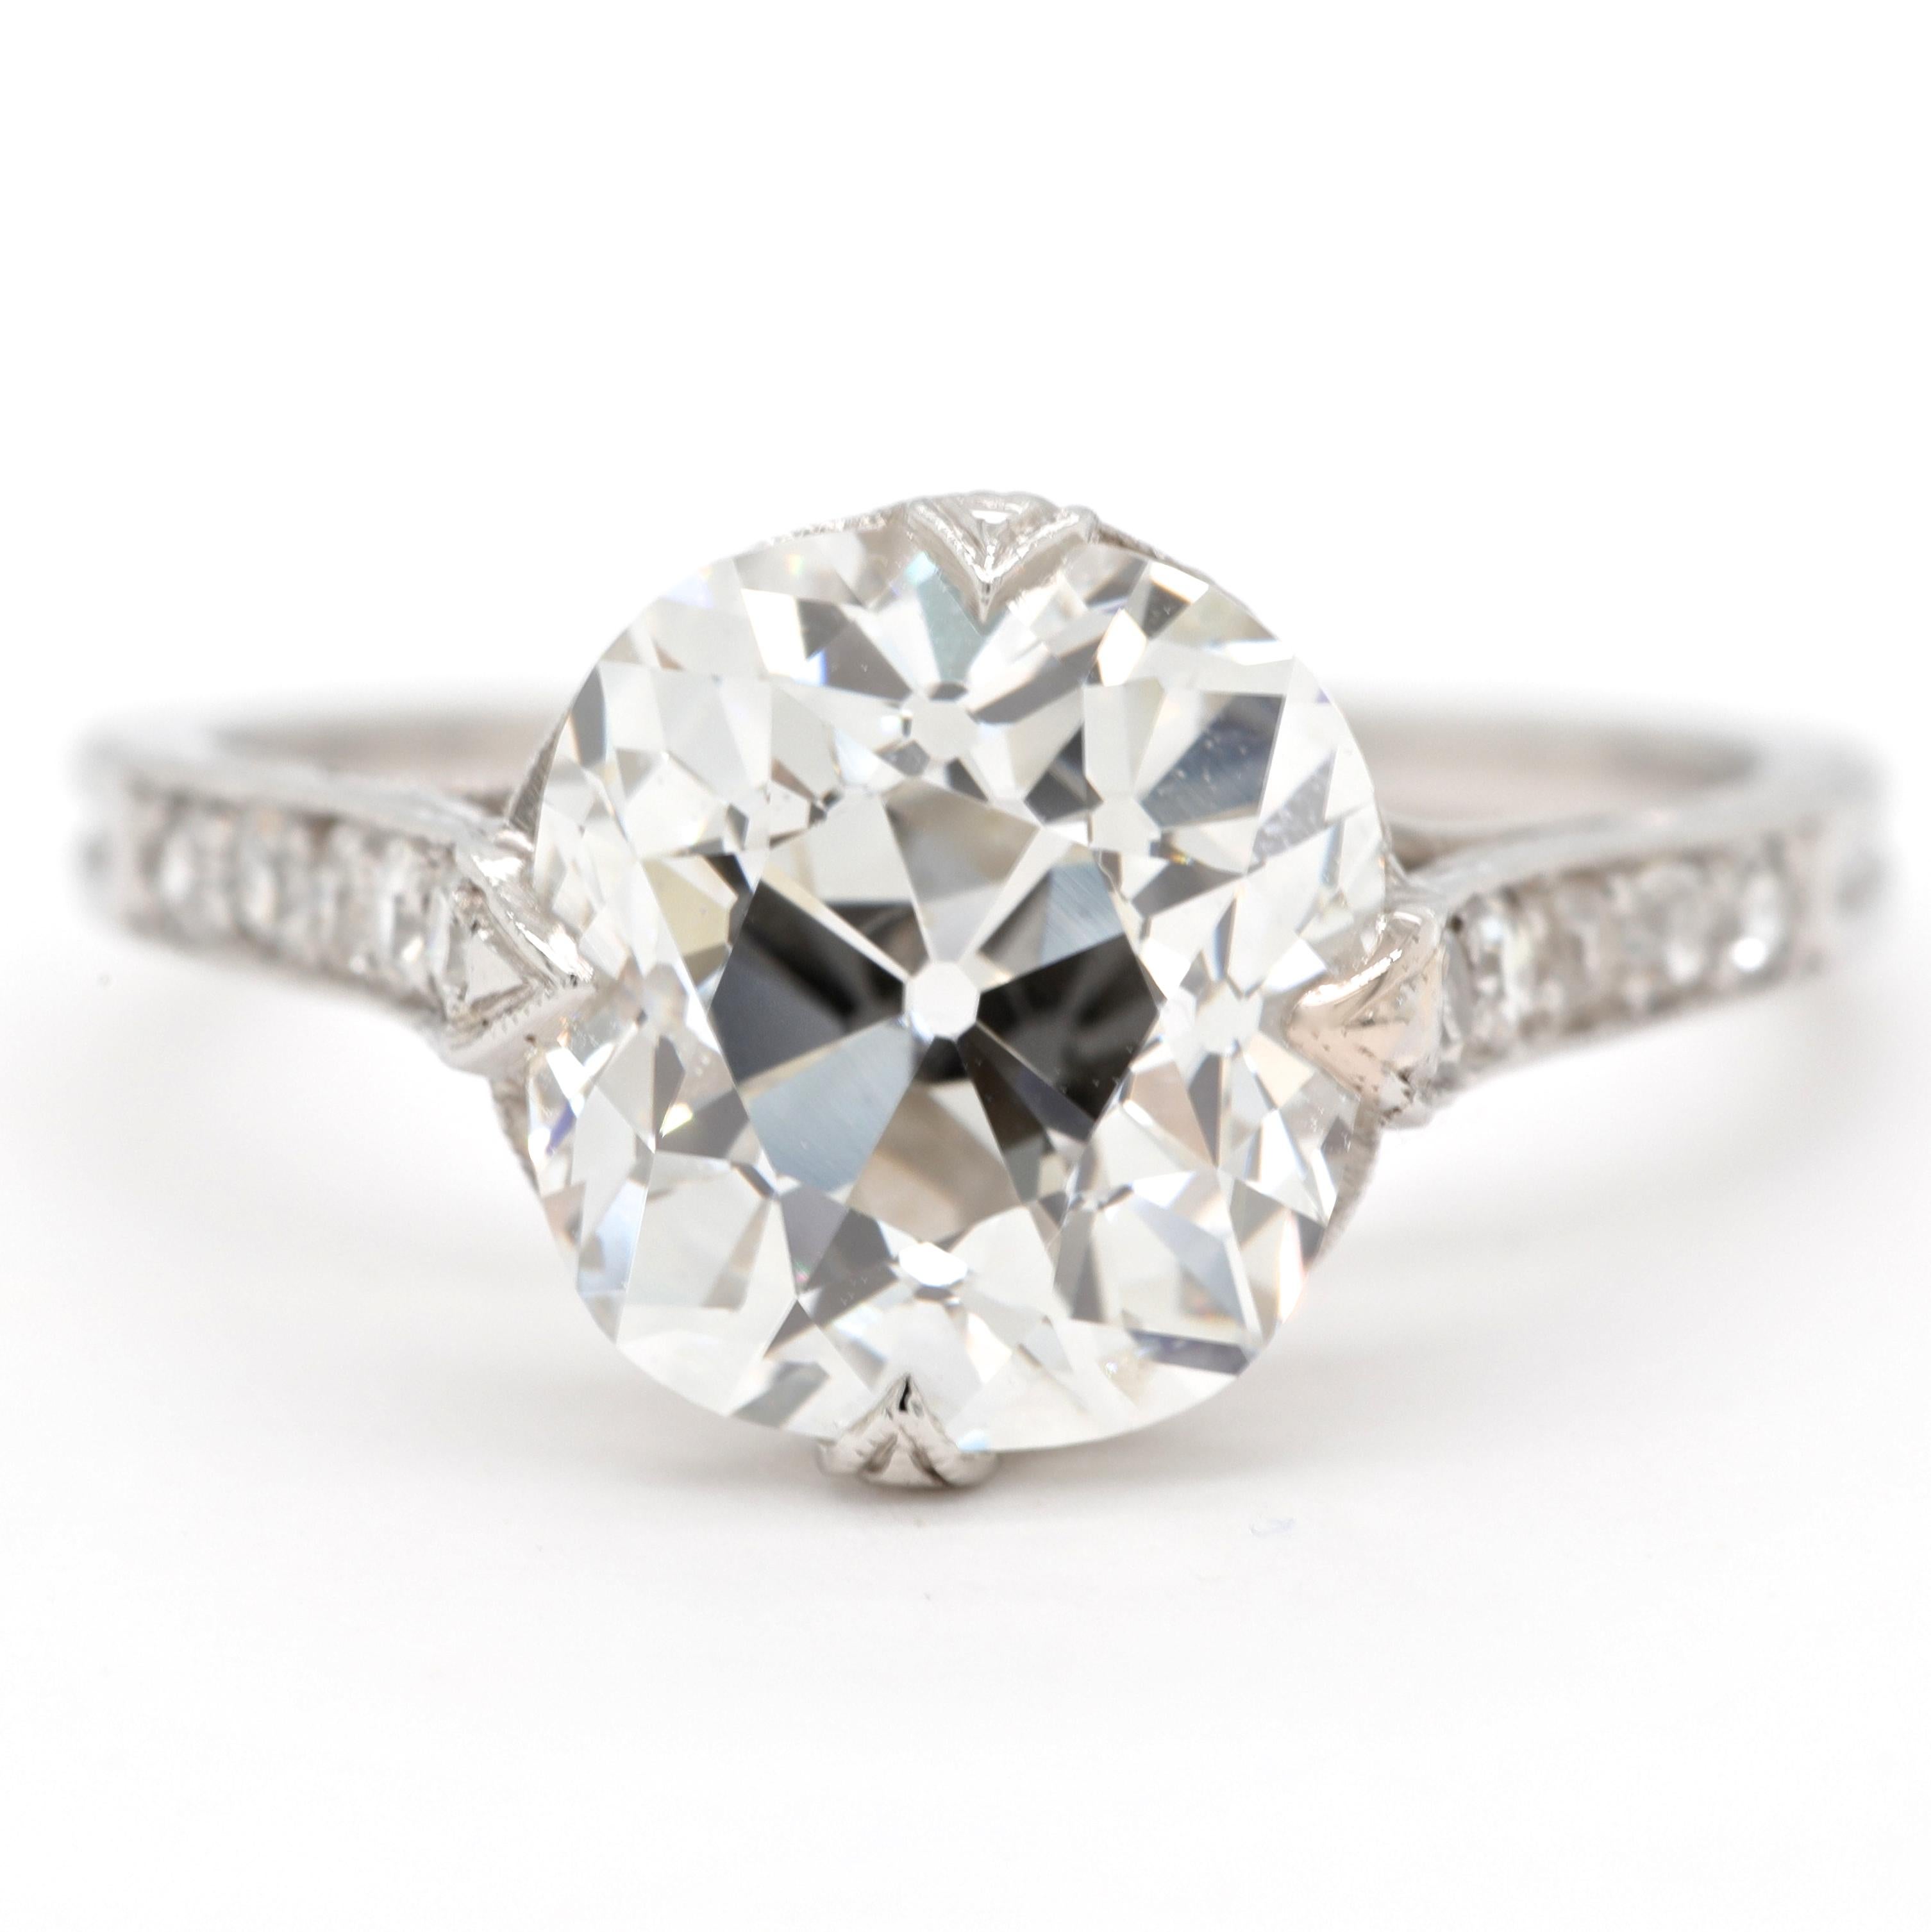 The ultimate Art Deco vintage engagement ring. The perfect diamond, setting and the stunning band, all make a dream ring. No matter where you go, this ring is definitely eye-catching. The center stone is GIA certified as old Mine cut diamond